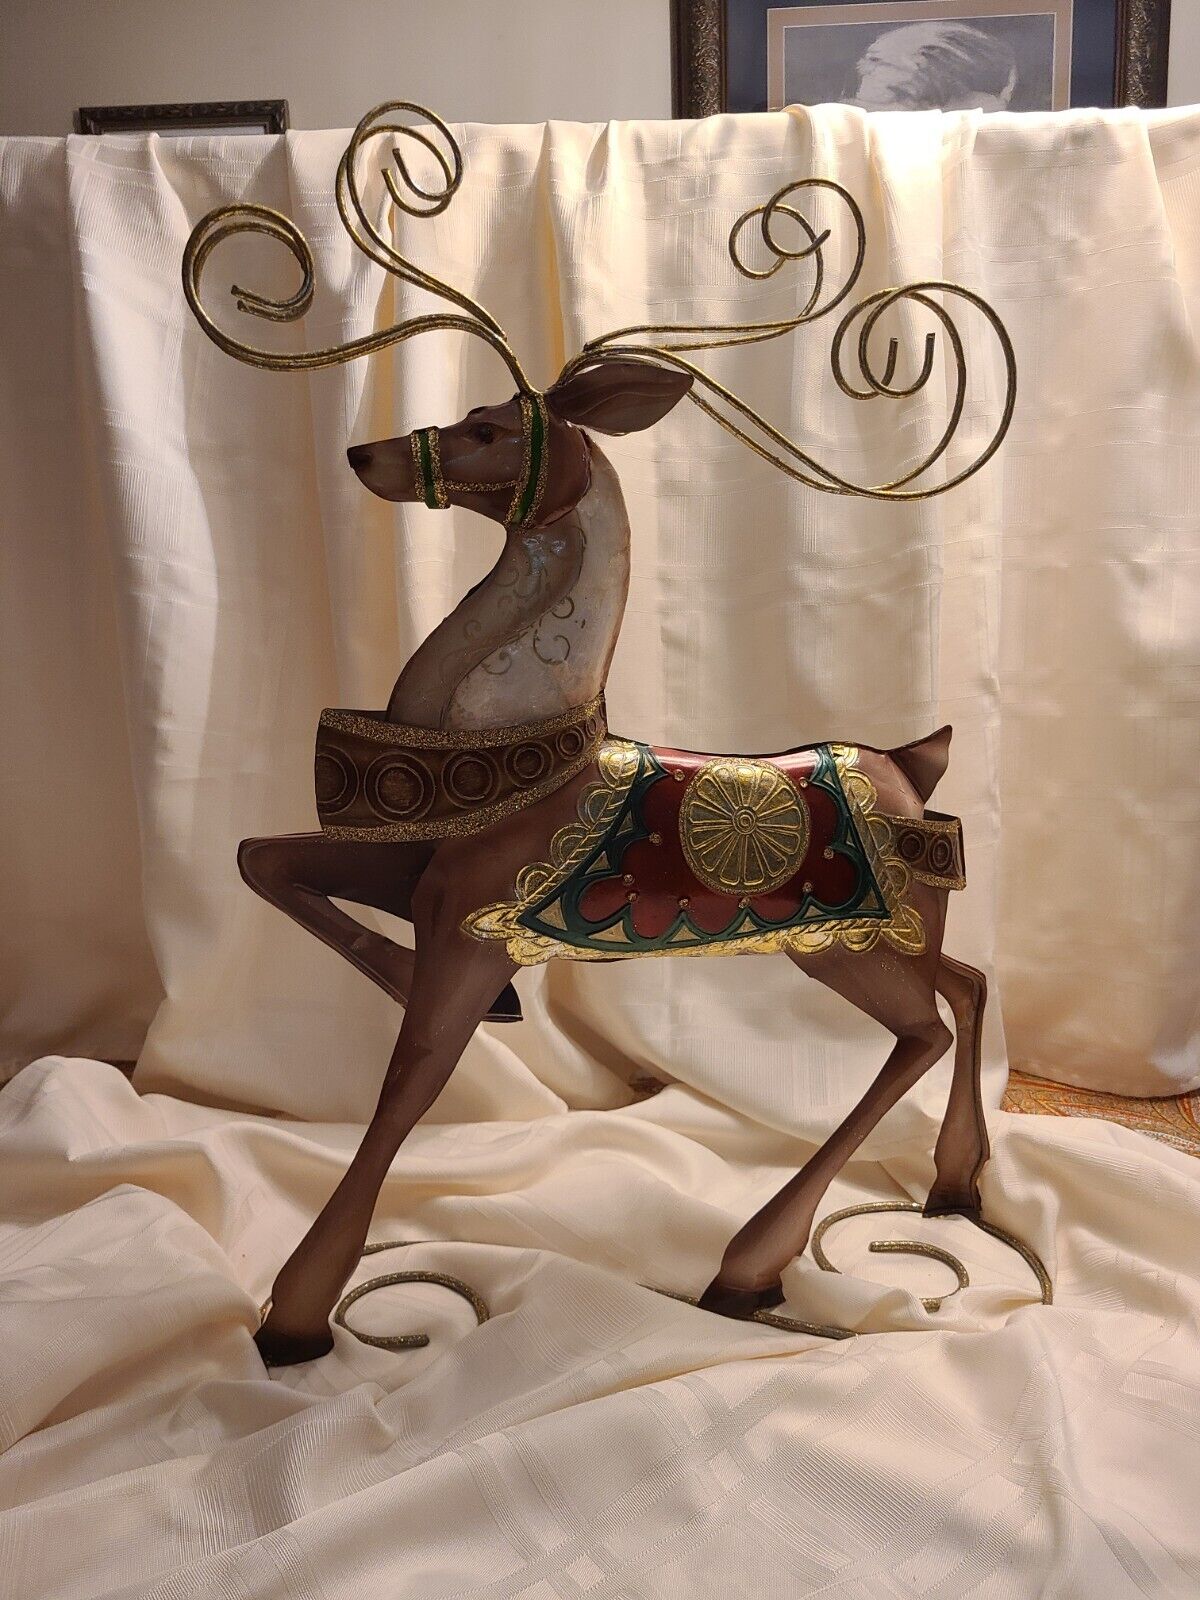 Pier 1 Imports- Large Metal Christmas Reindeer- New In Box